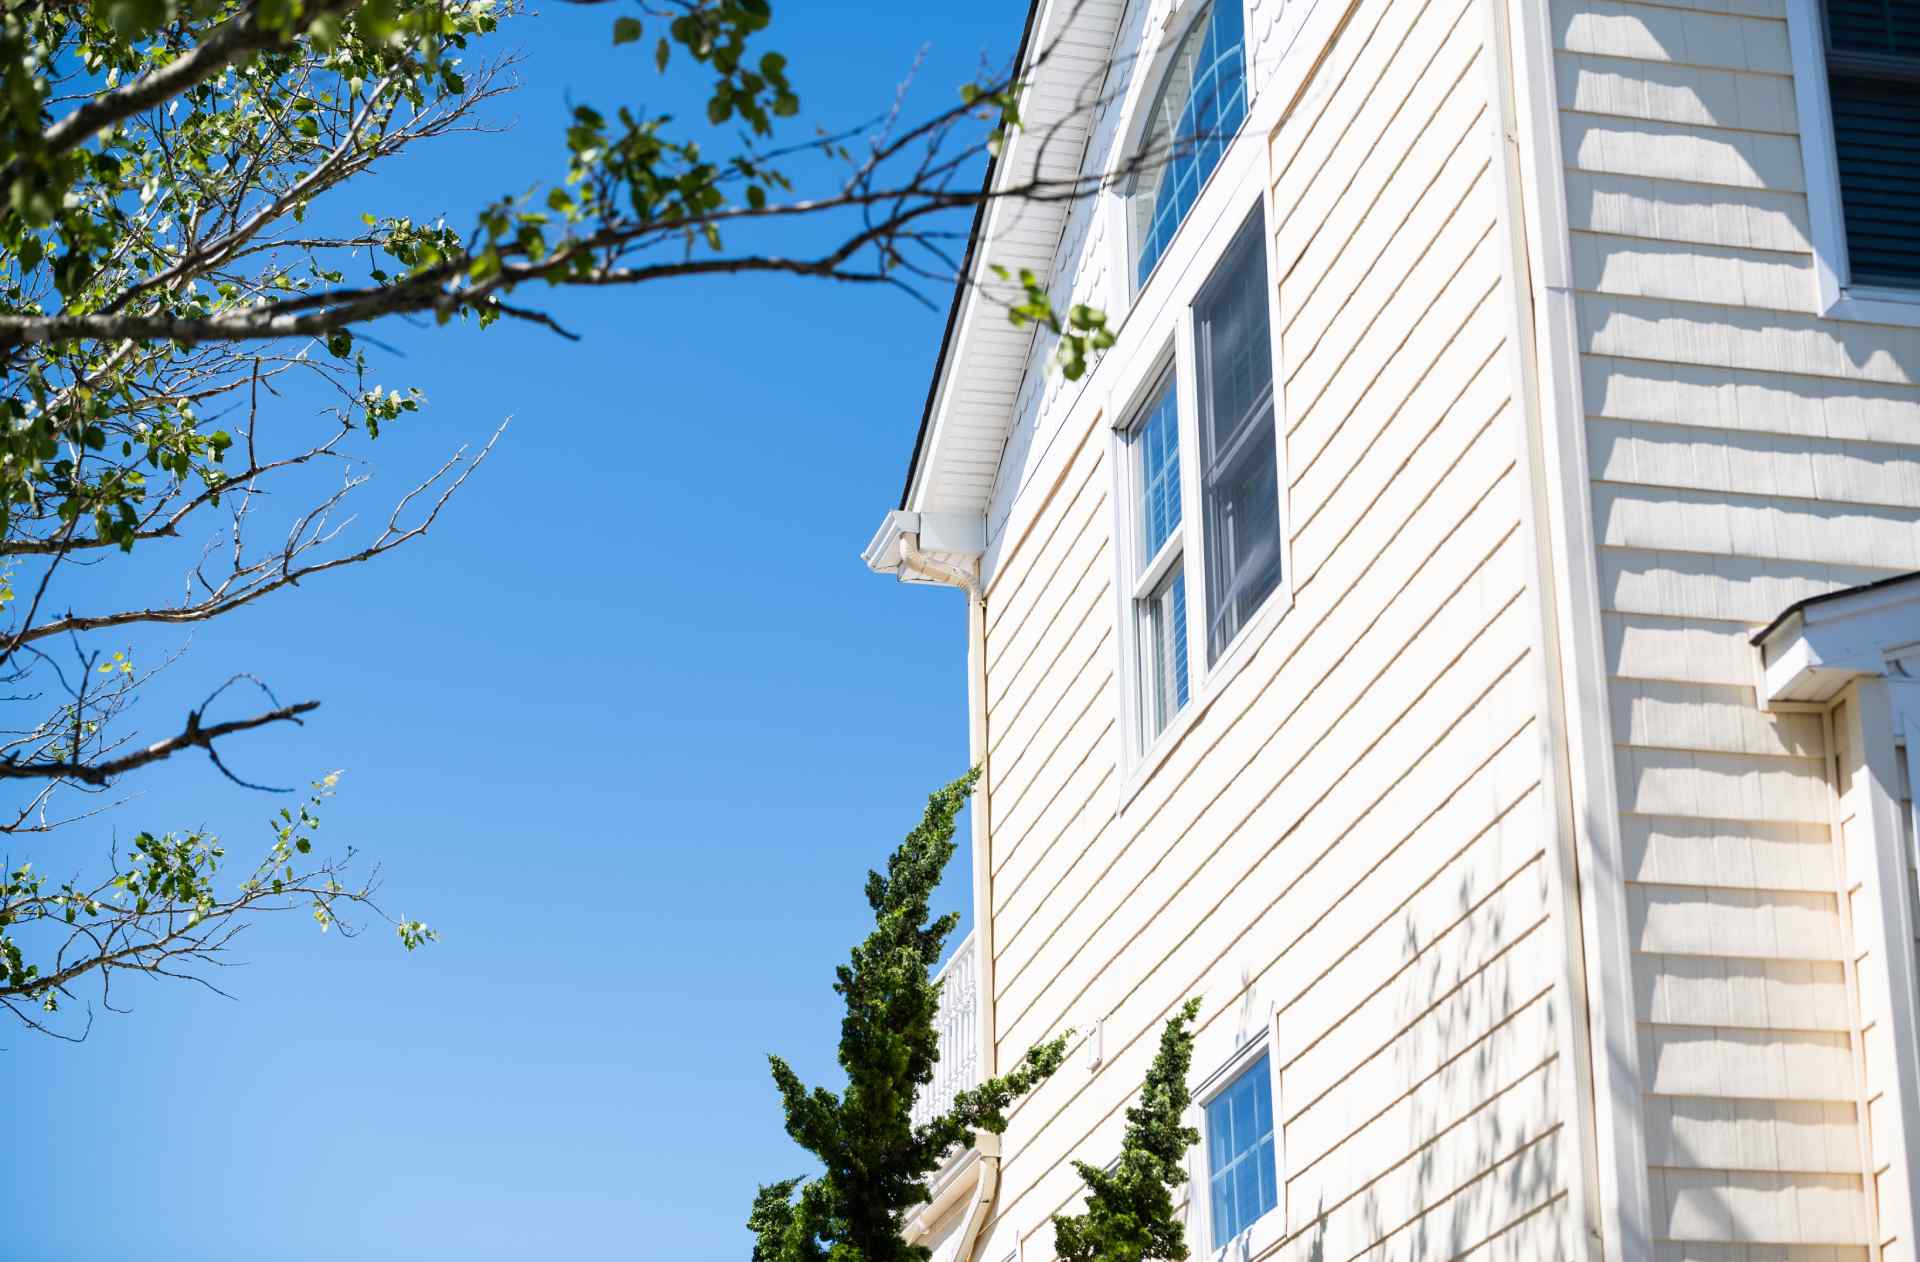 How Do You Know If Your Vinyl Siding Needs to be Replaced?